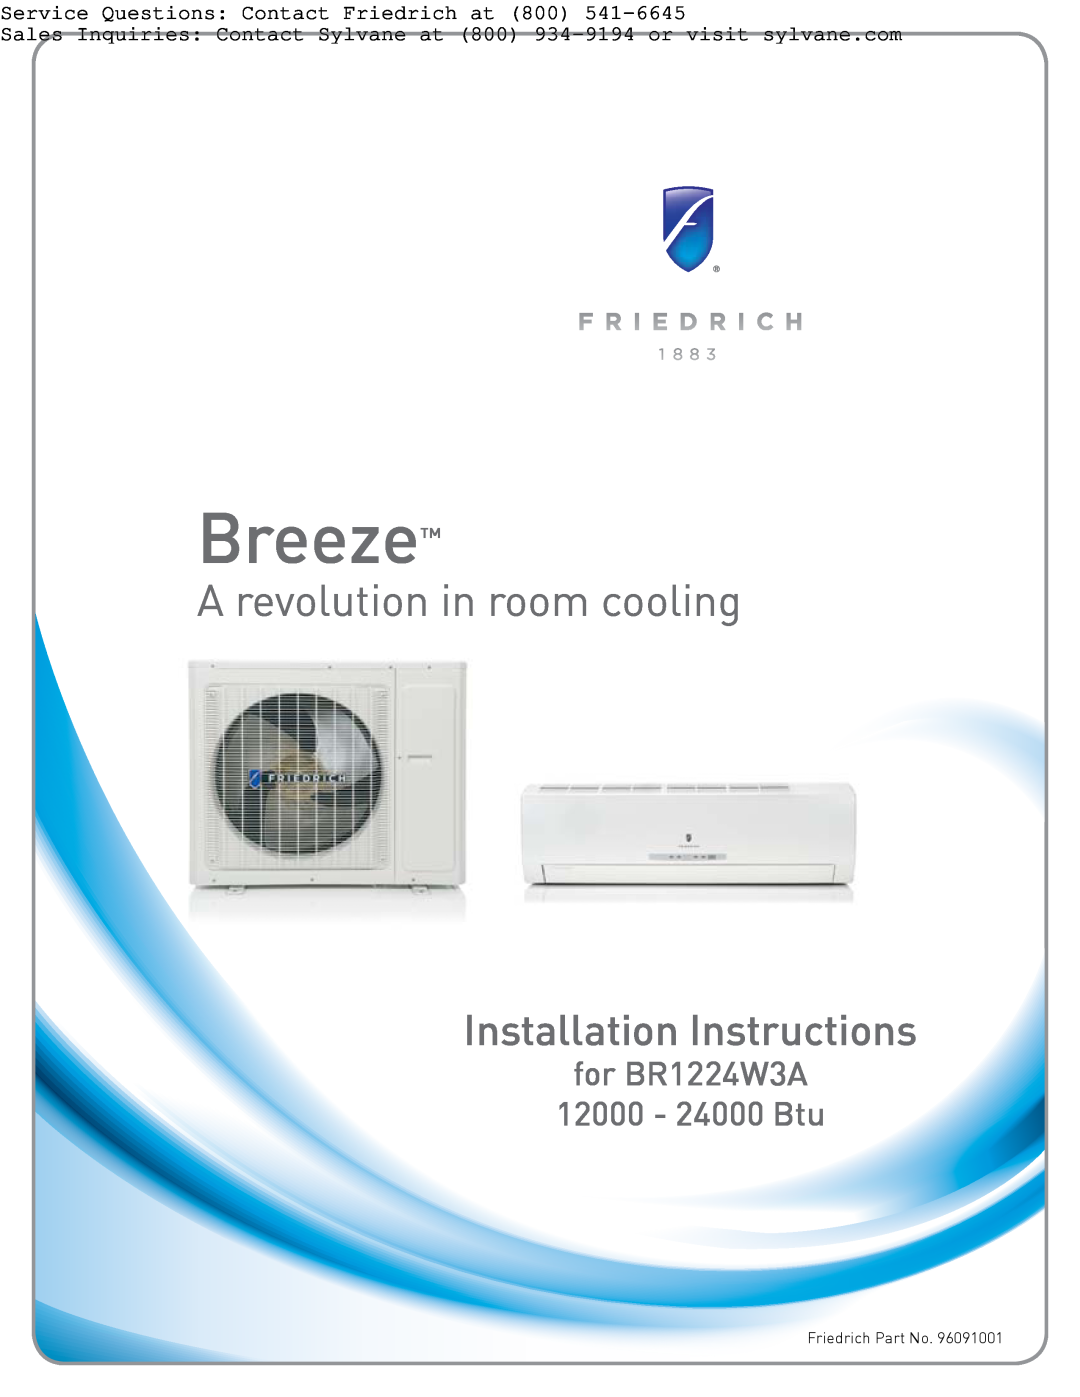 Friedrich BR1224W3A installation instructions Service Questions Contact Friedrich at, Breeze, A revolution in room cooling 